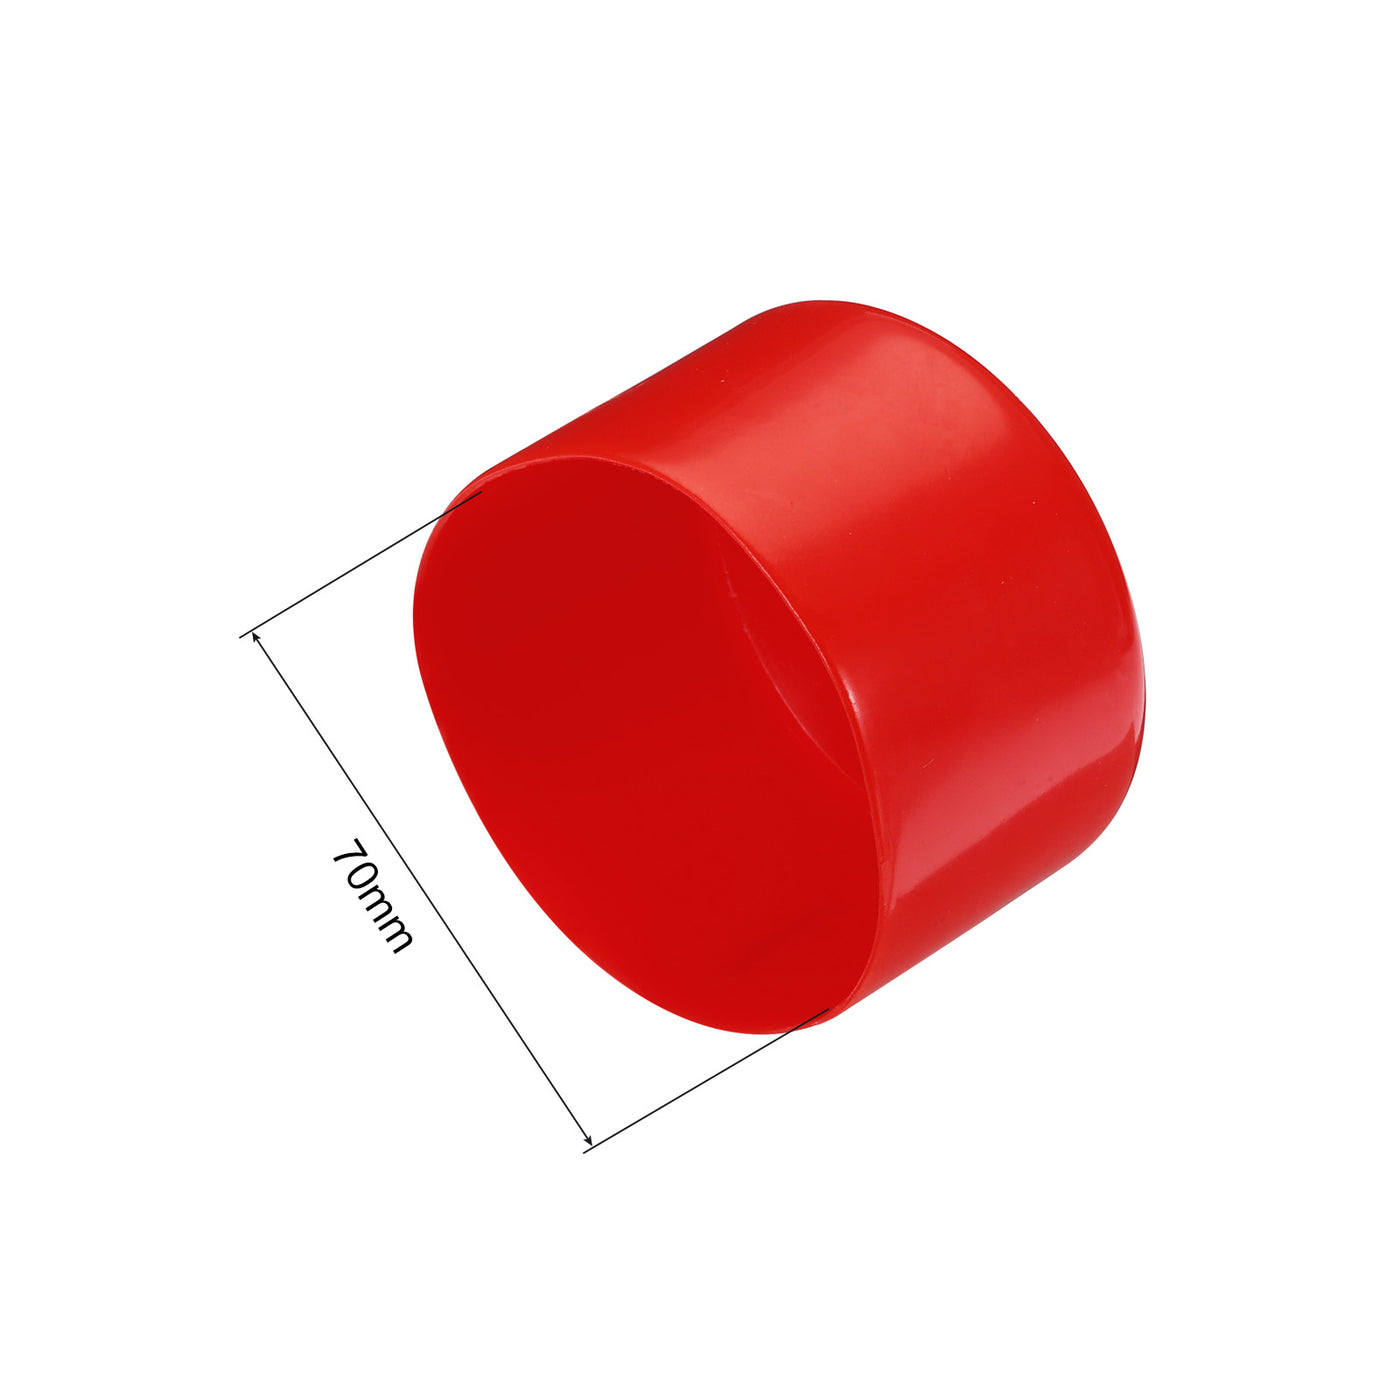 uxcell Uxcell 2pcs Rubber End Caps 70mm ID Vinyl Round Tube Bolt Cap Cover Screw Thread Protectors Red